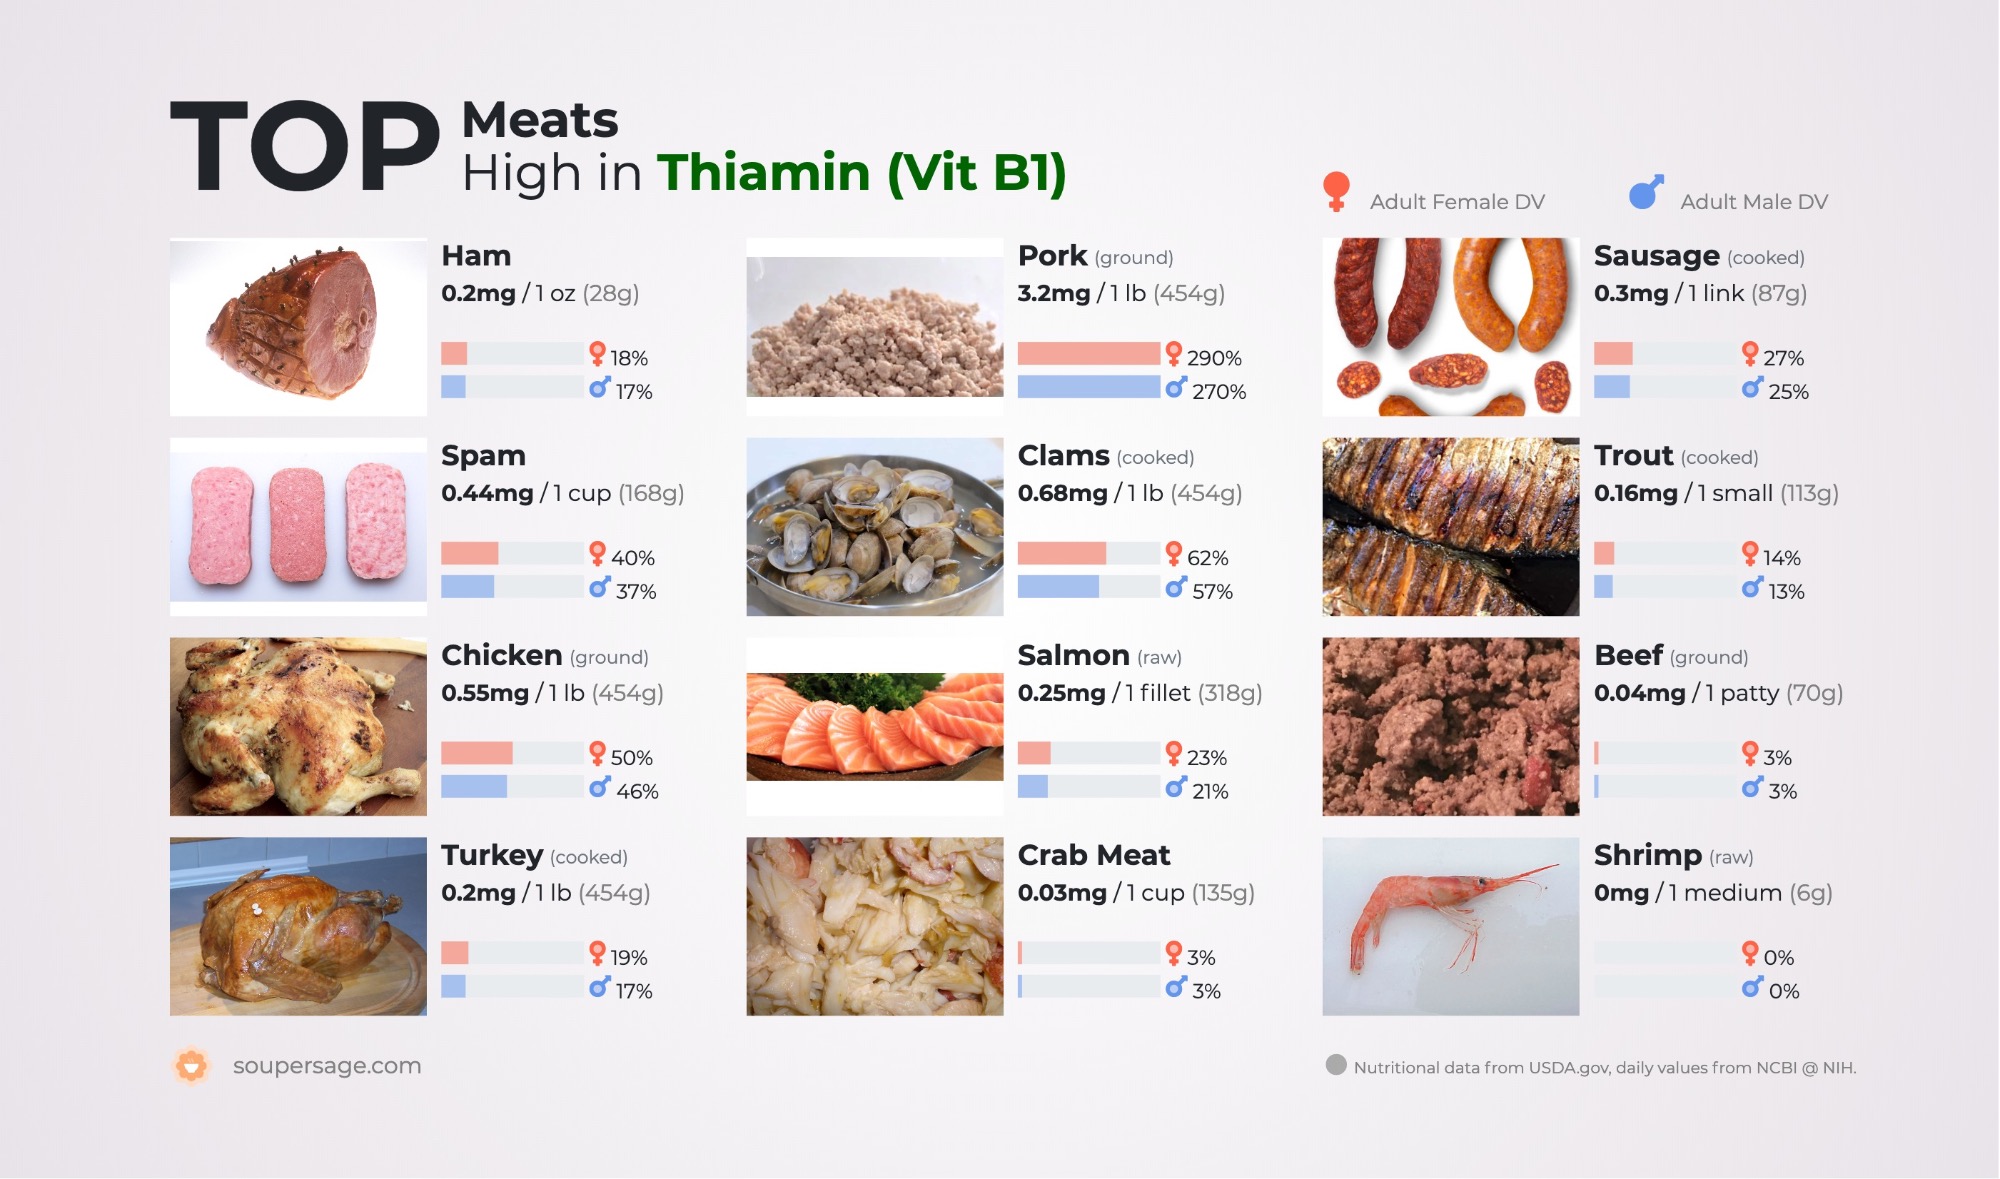 image of Top Meats High in Thiamin (Vit B1)